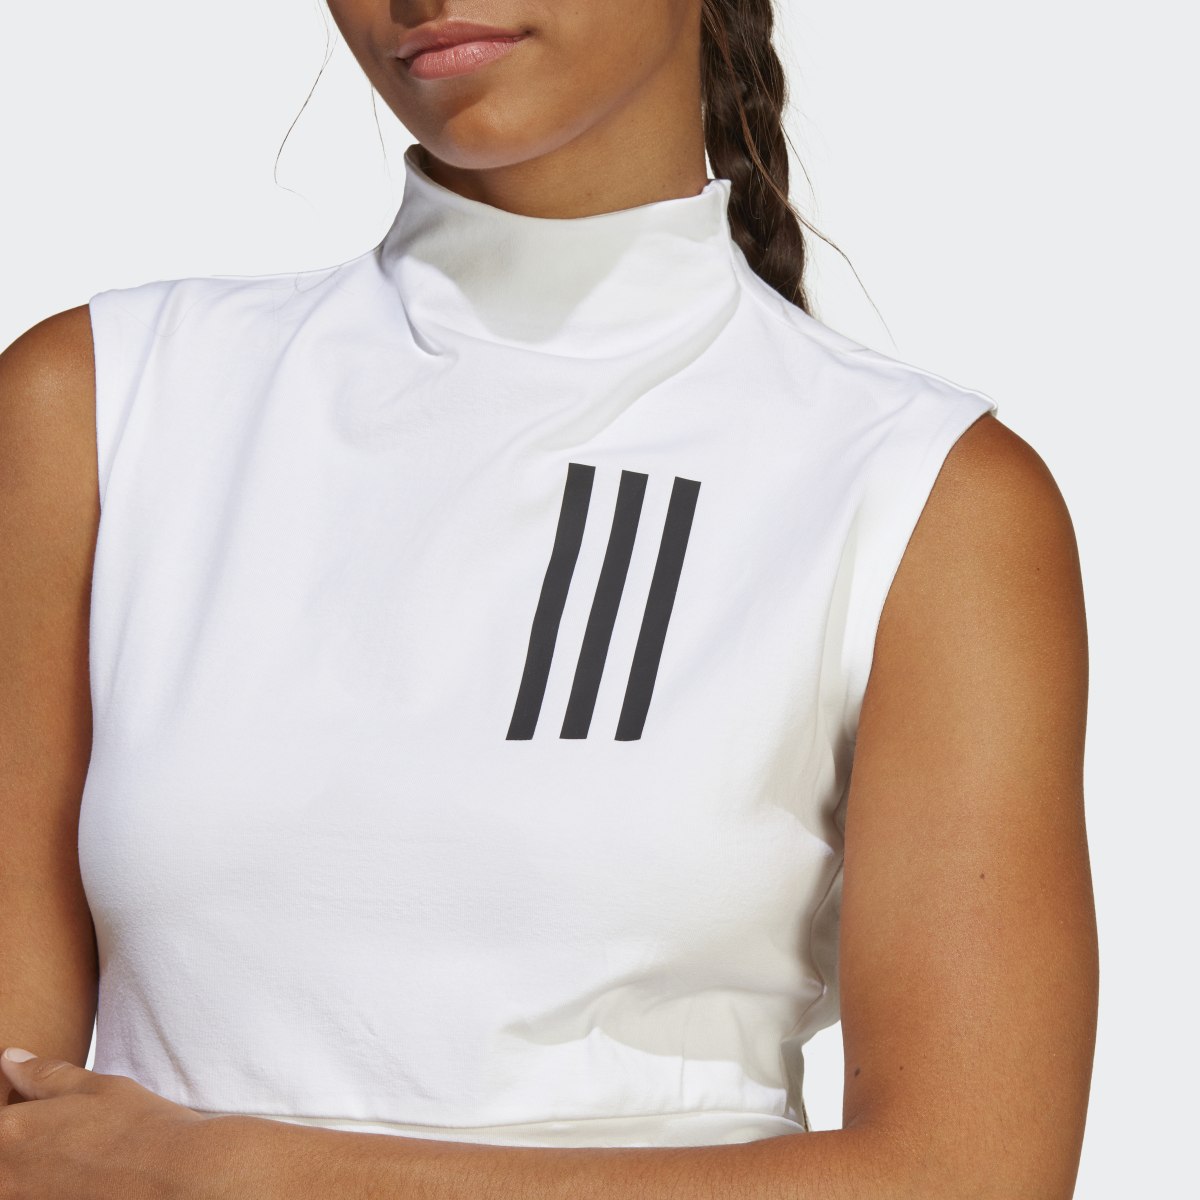 Adidas Mission Victory Sleeveless Cropped Top. 6